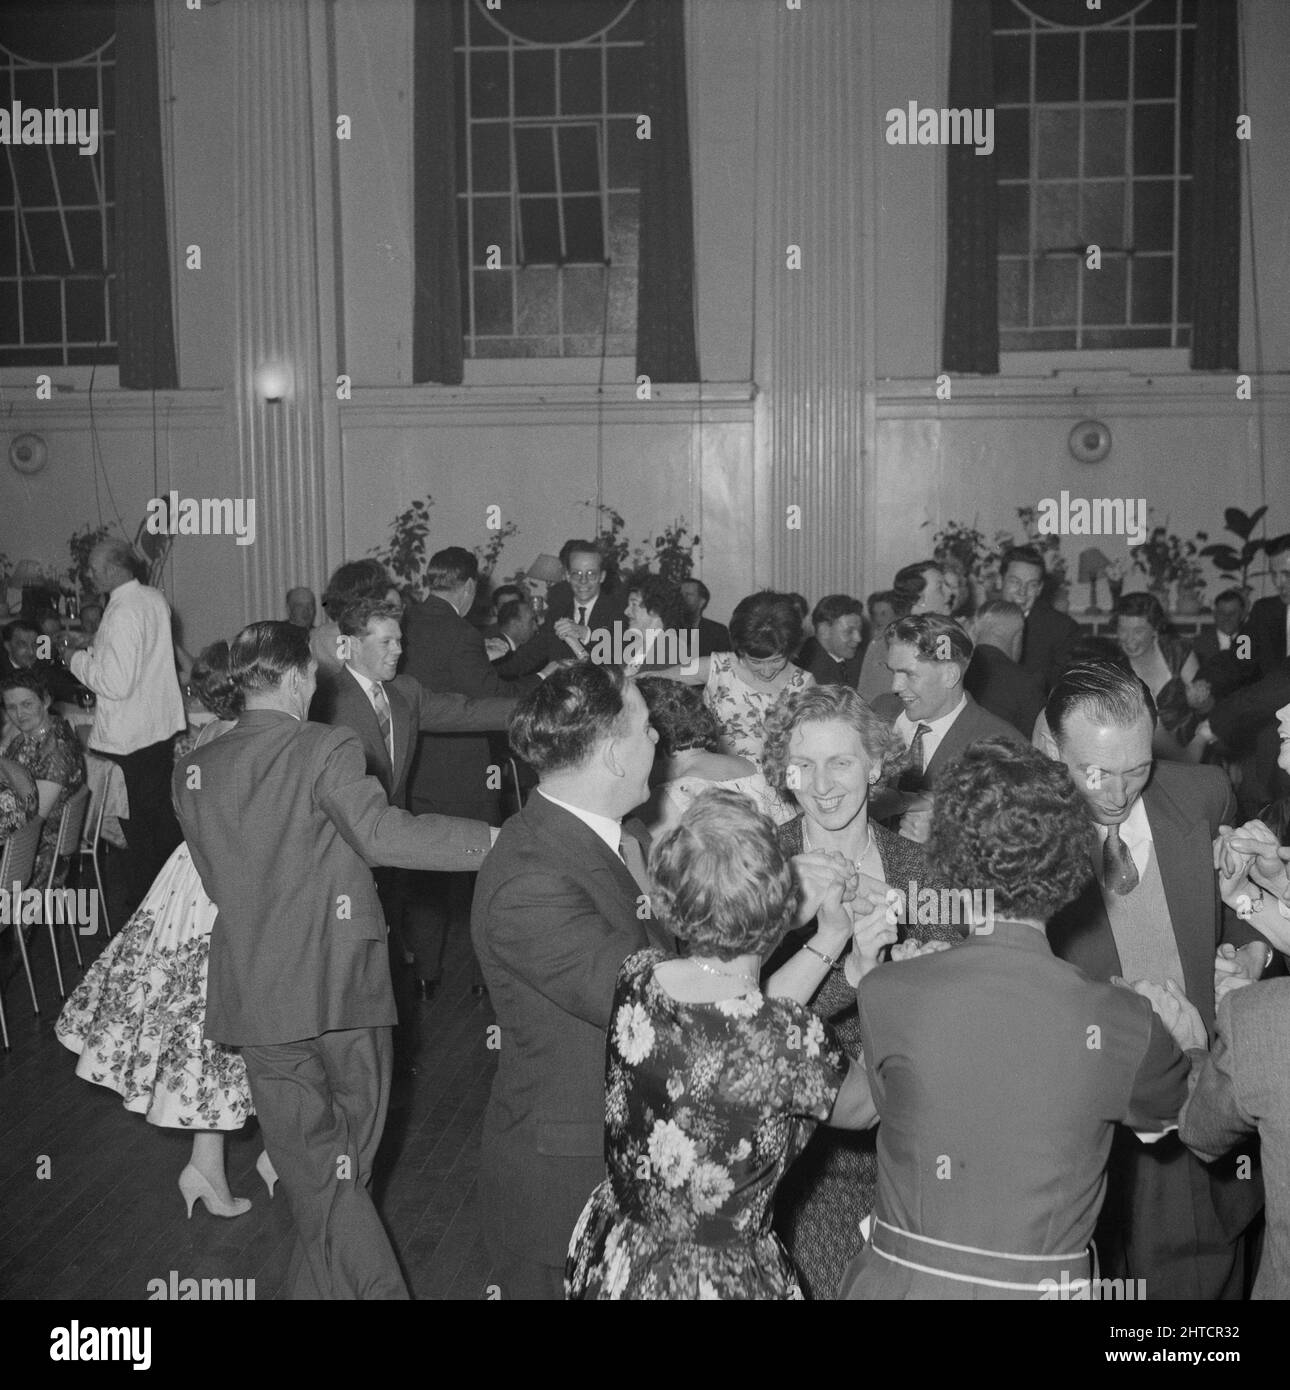 The Grand Hotel, Broad Street, Bristol, City of Bristol, 04/03/1959. A group of people dancing at the Grand Hotel. This dinner and dance was attended by staff from Laing's South-Western region with retiring directors, W M Johnson and A Anderson, as guests of honour. Stock Photo